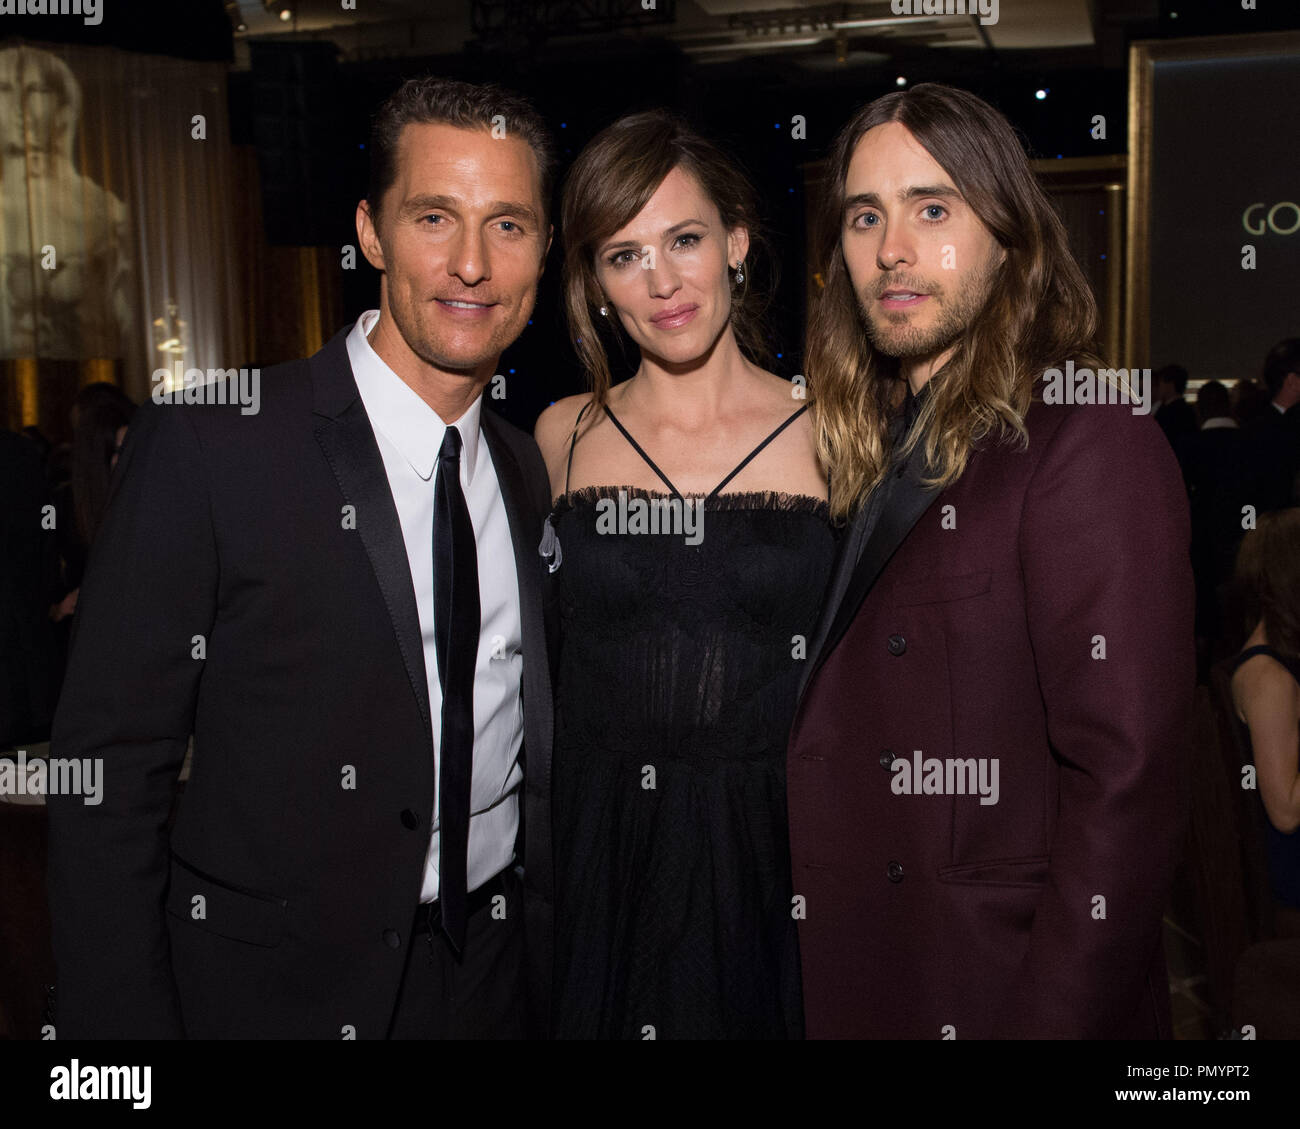 Actor Matthew McConaughey (left), Jennifer Garner (center) and Jared Leto attend the 5th Annual Governors Awards at The Ray Dolby Ballroom at Hollywood & Highland Center® in Hollywood, CA, on Saturday, November 16, 2013.  File Reference # 32184 004  For Editorial Use Only -  All Rights Reserved Stock Photo